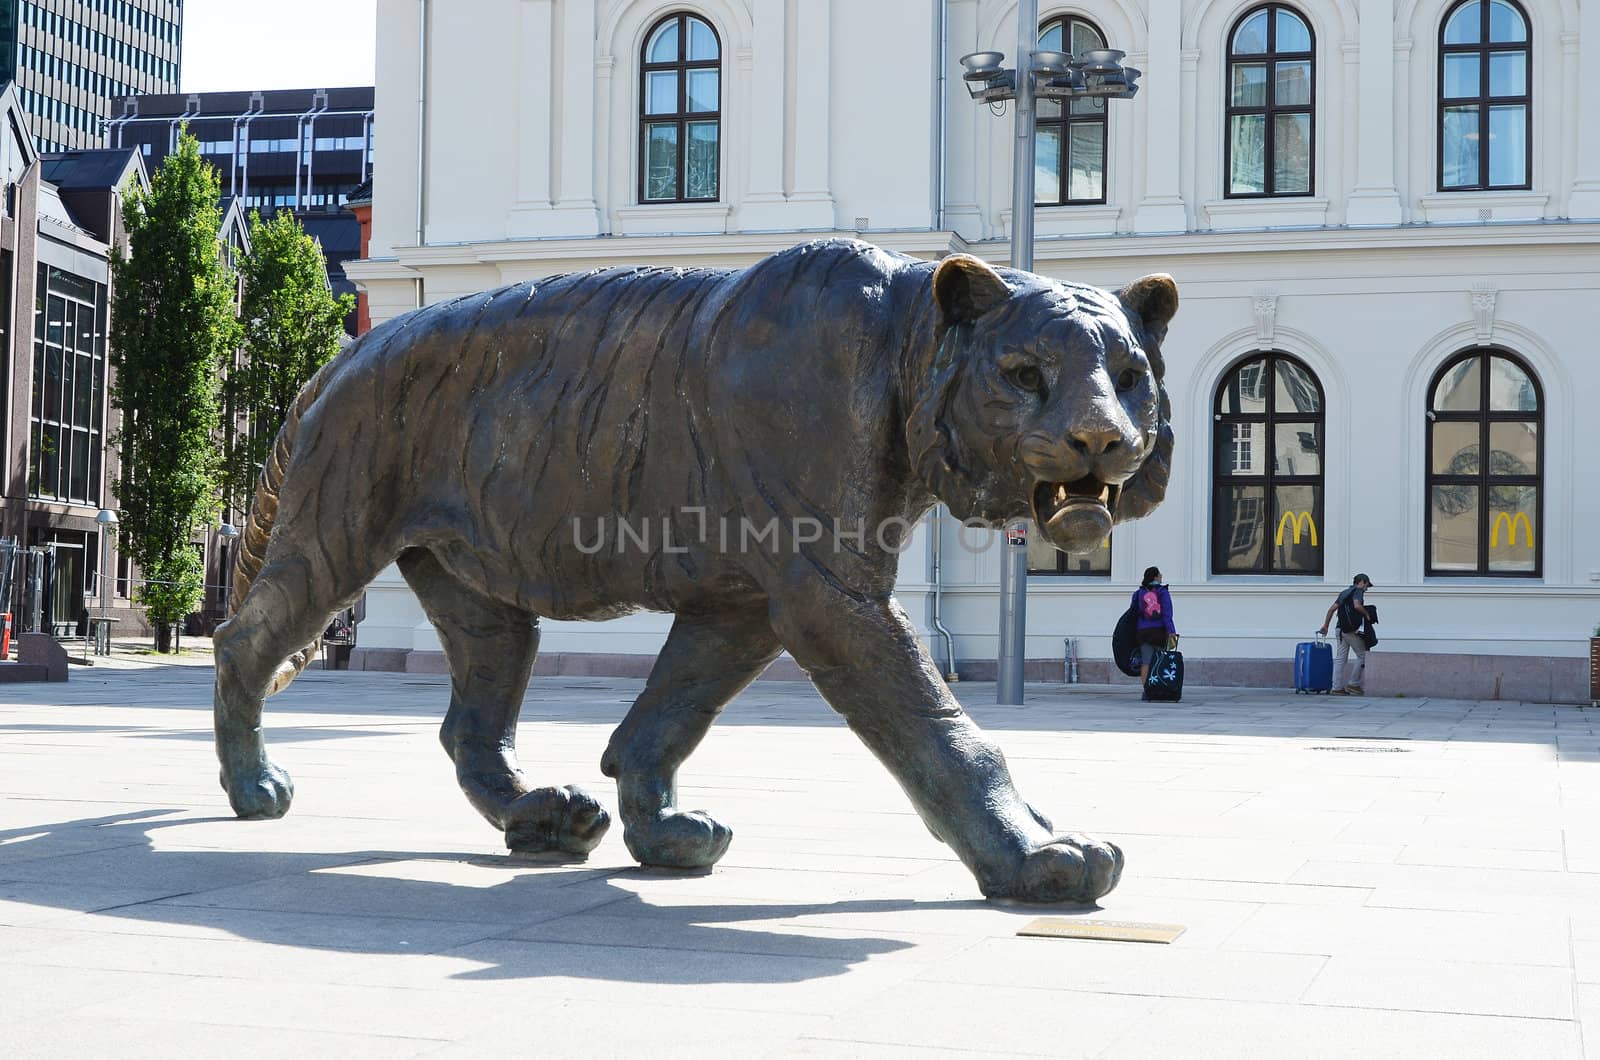 A statue of a tiger standing on the square in front of the central station in Oslo, Norway